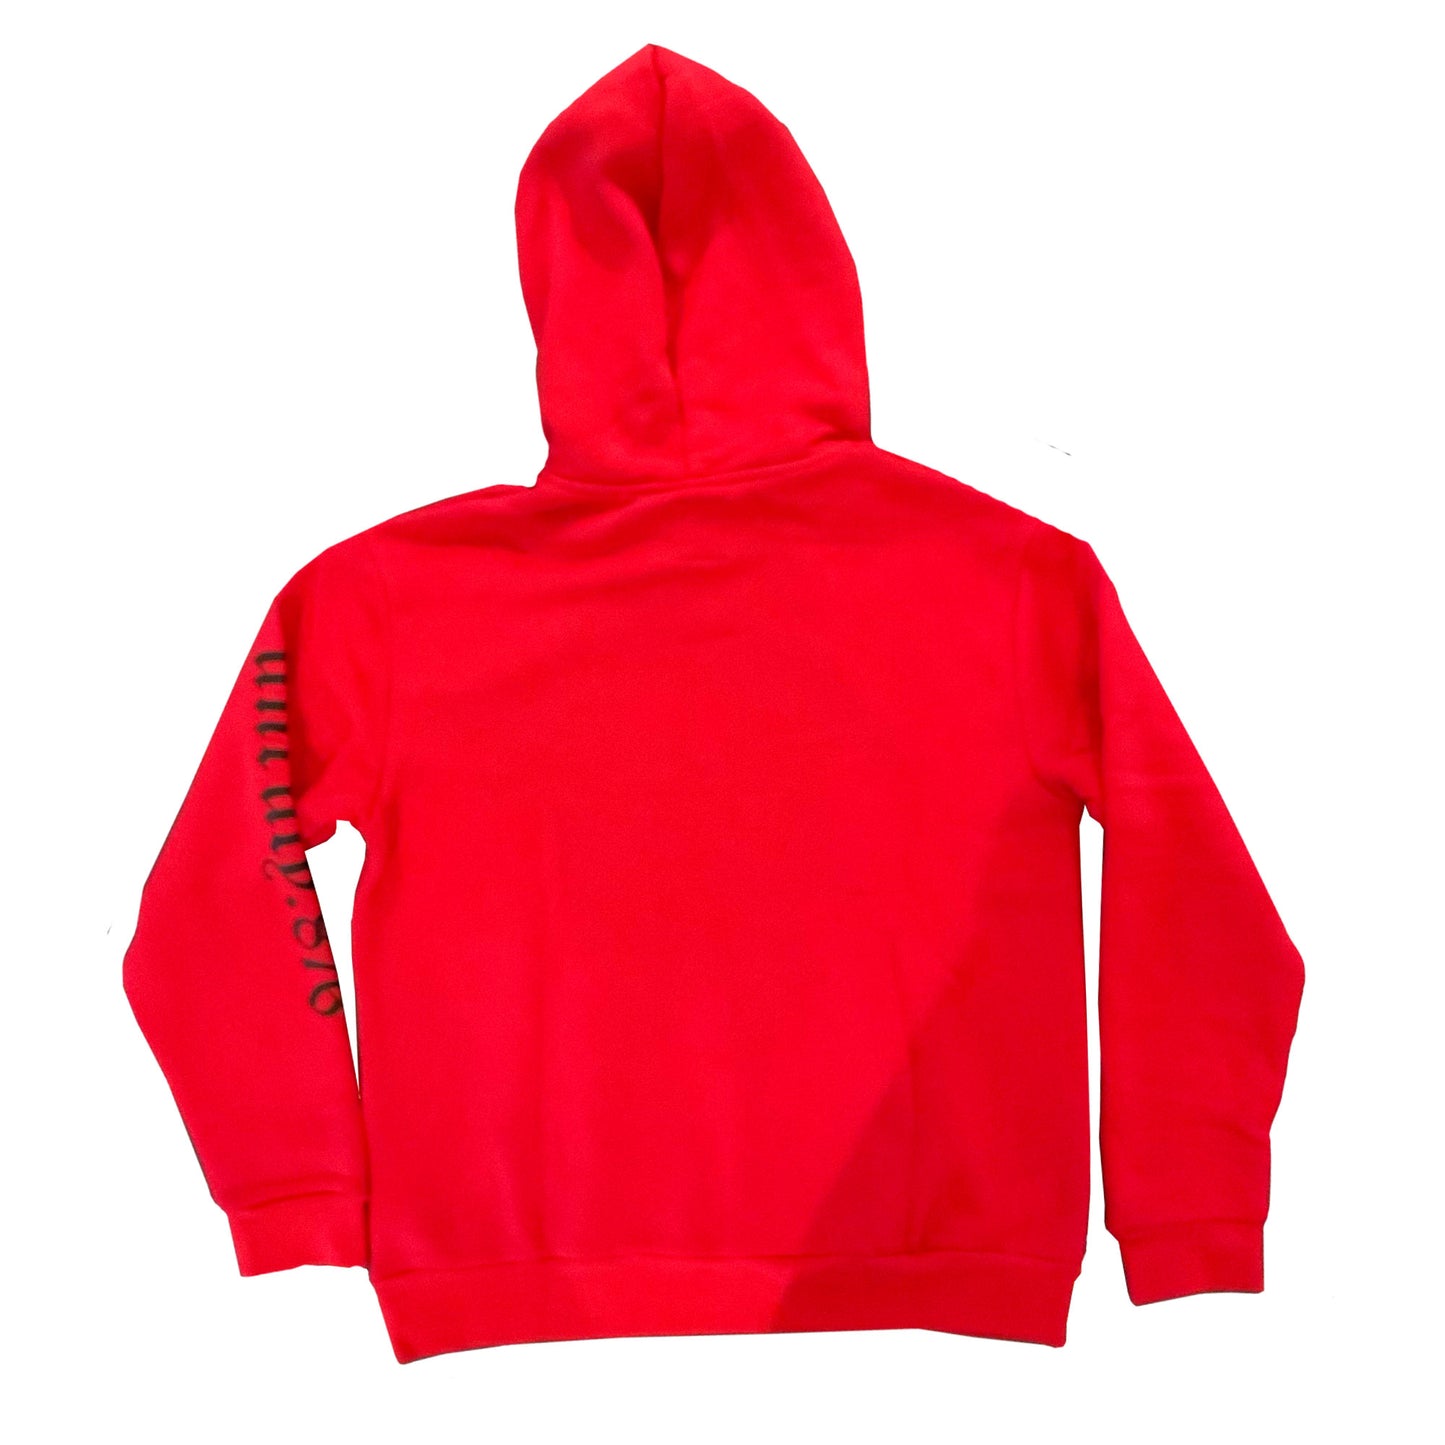 Unruly 876 Gad Mask Hoodie – The Unruly Shop